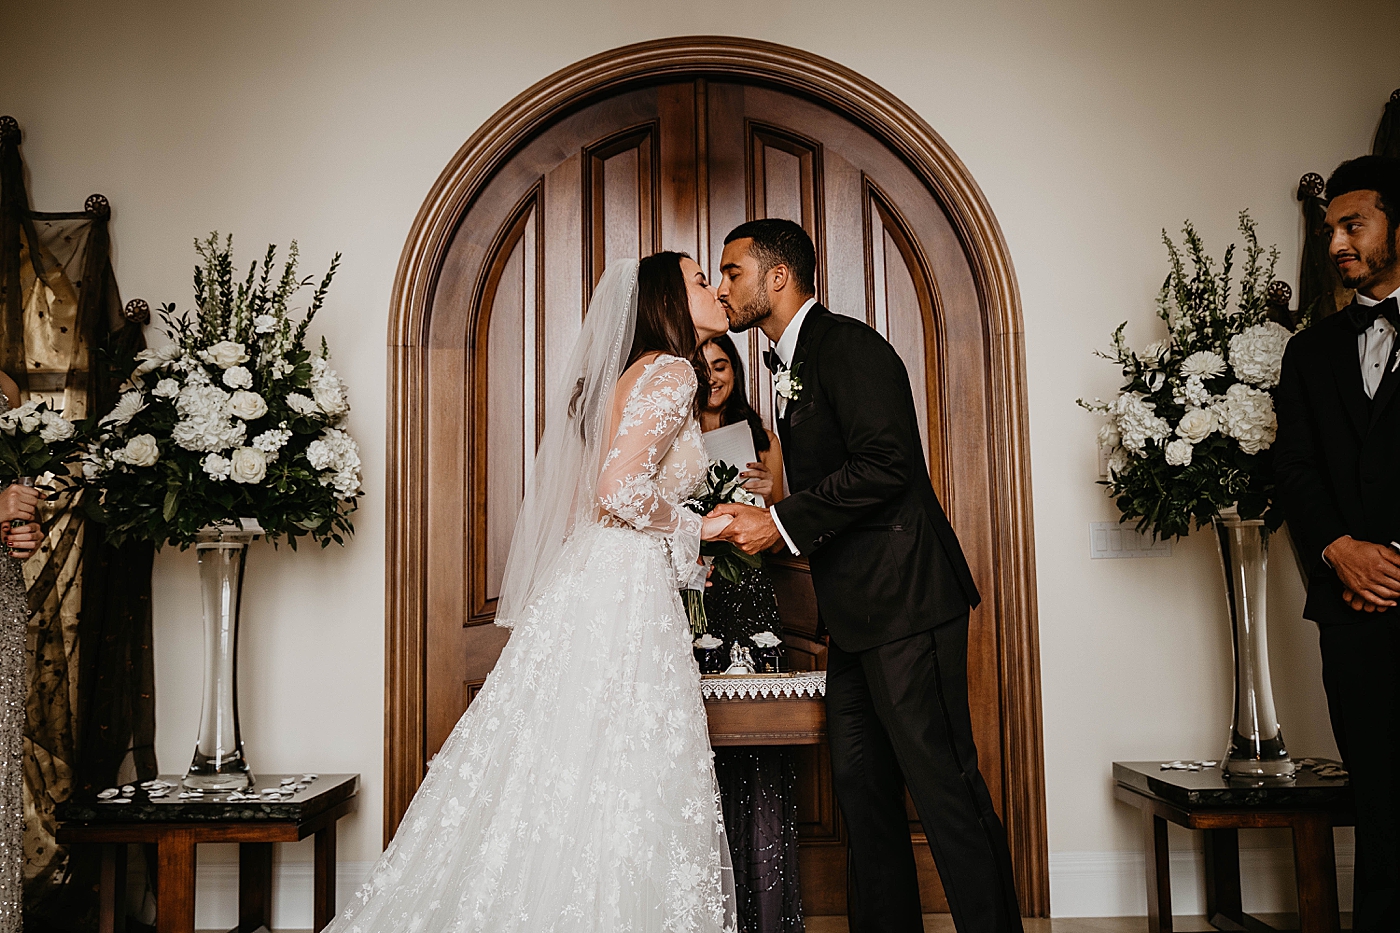 Bride and Groom Just married kissing Intimate Home Wedding captured by South Florida Wedding Photographer Krystal Capone Photography